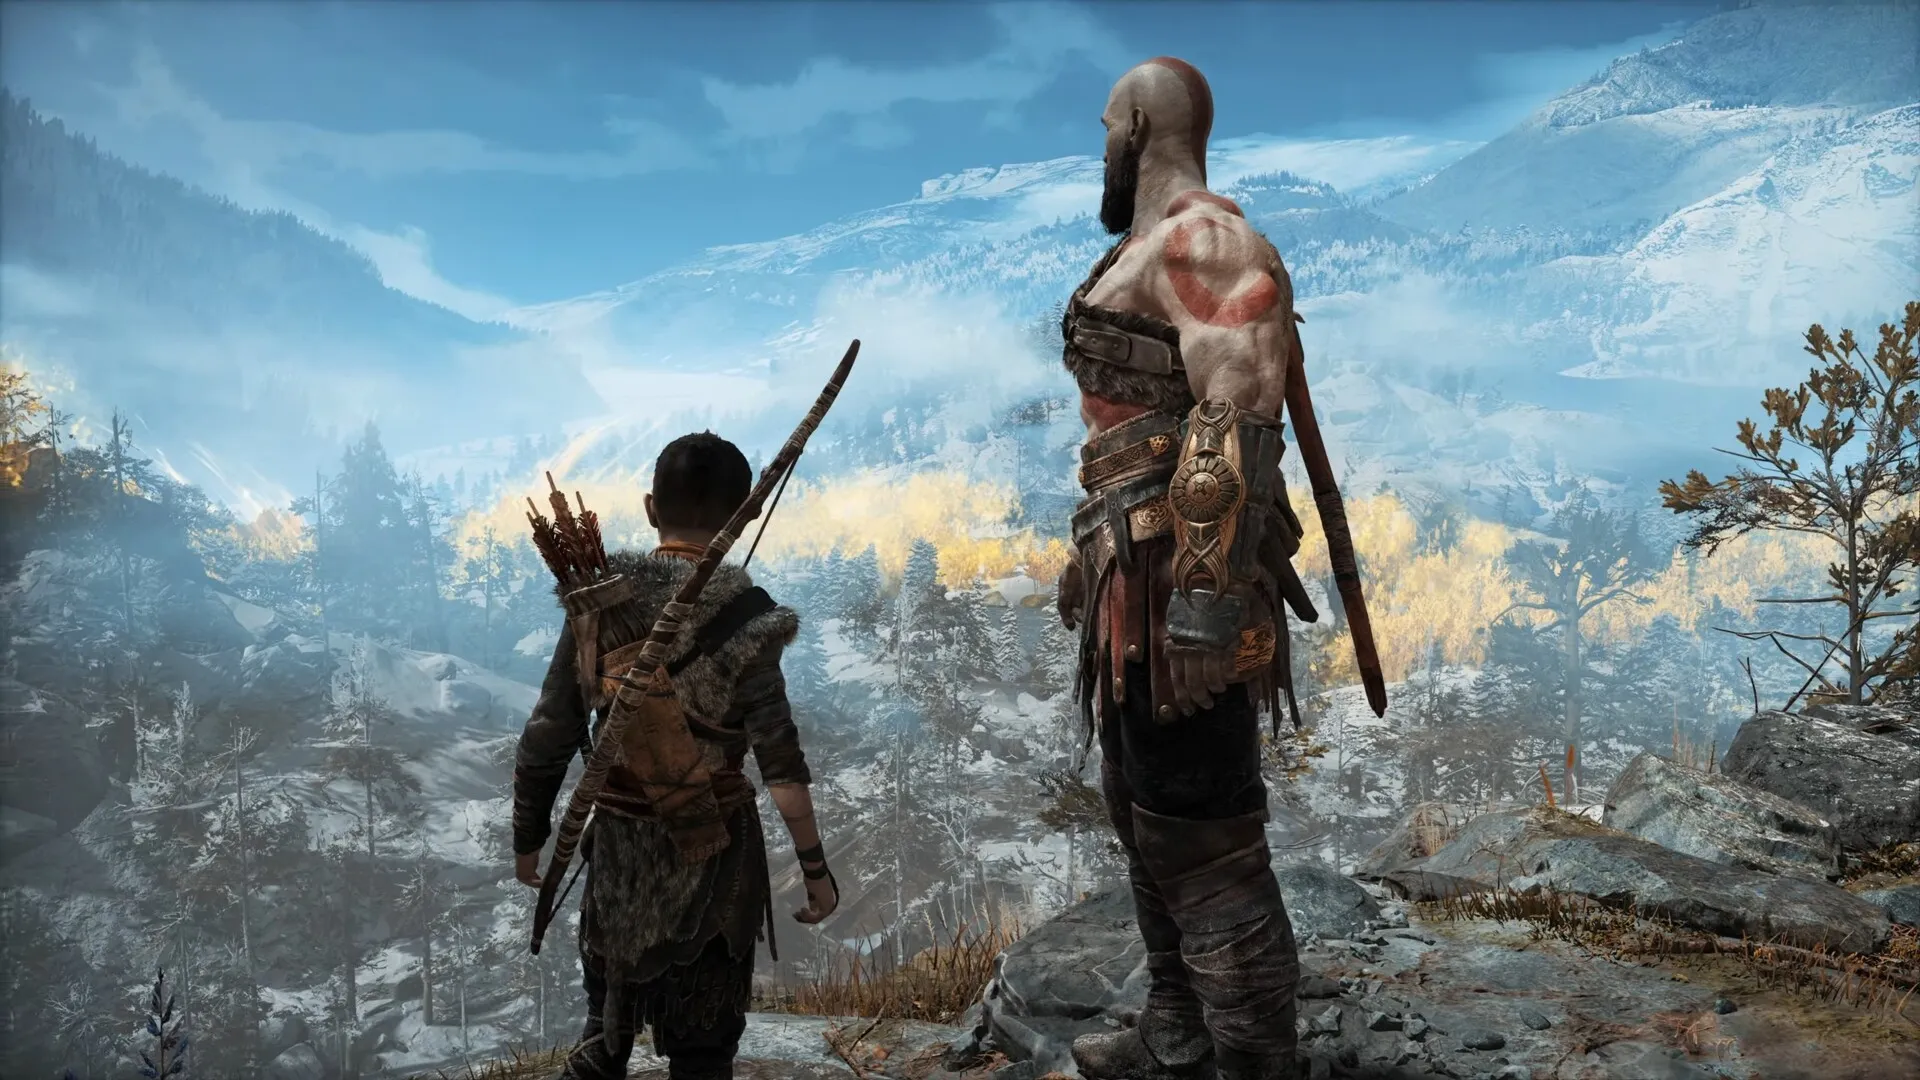 God of War PC release time